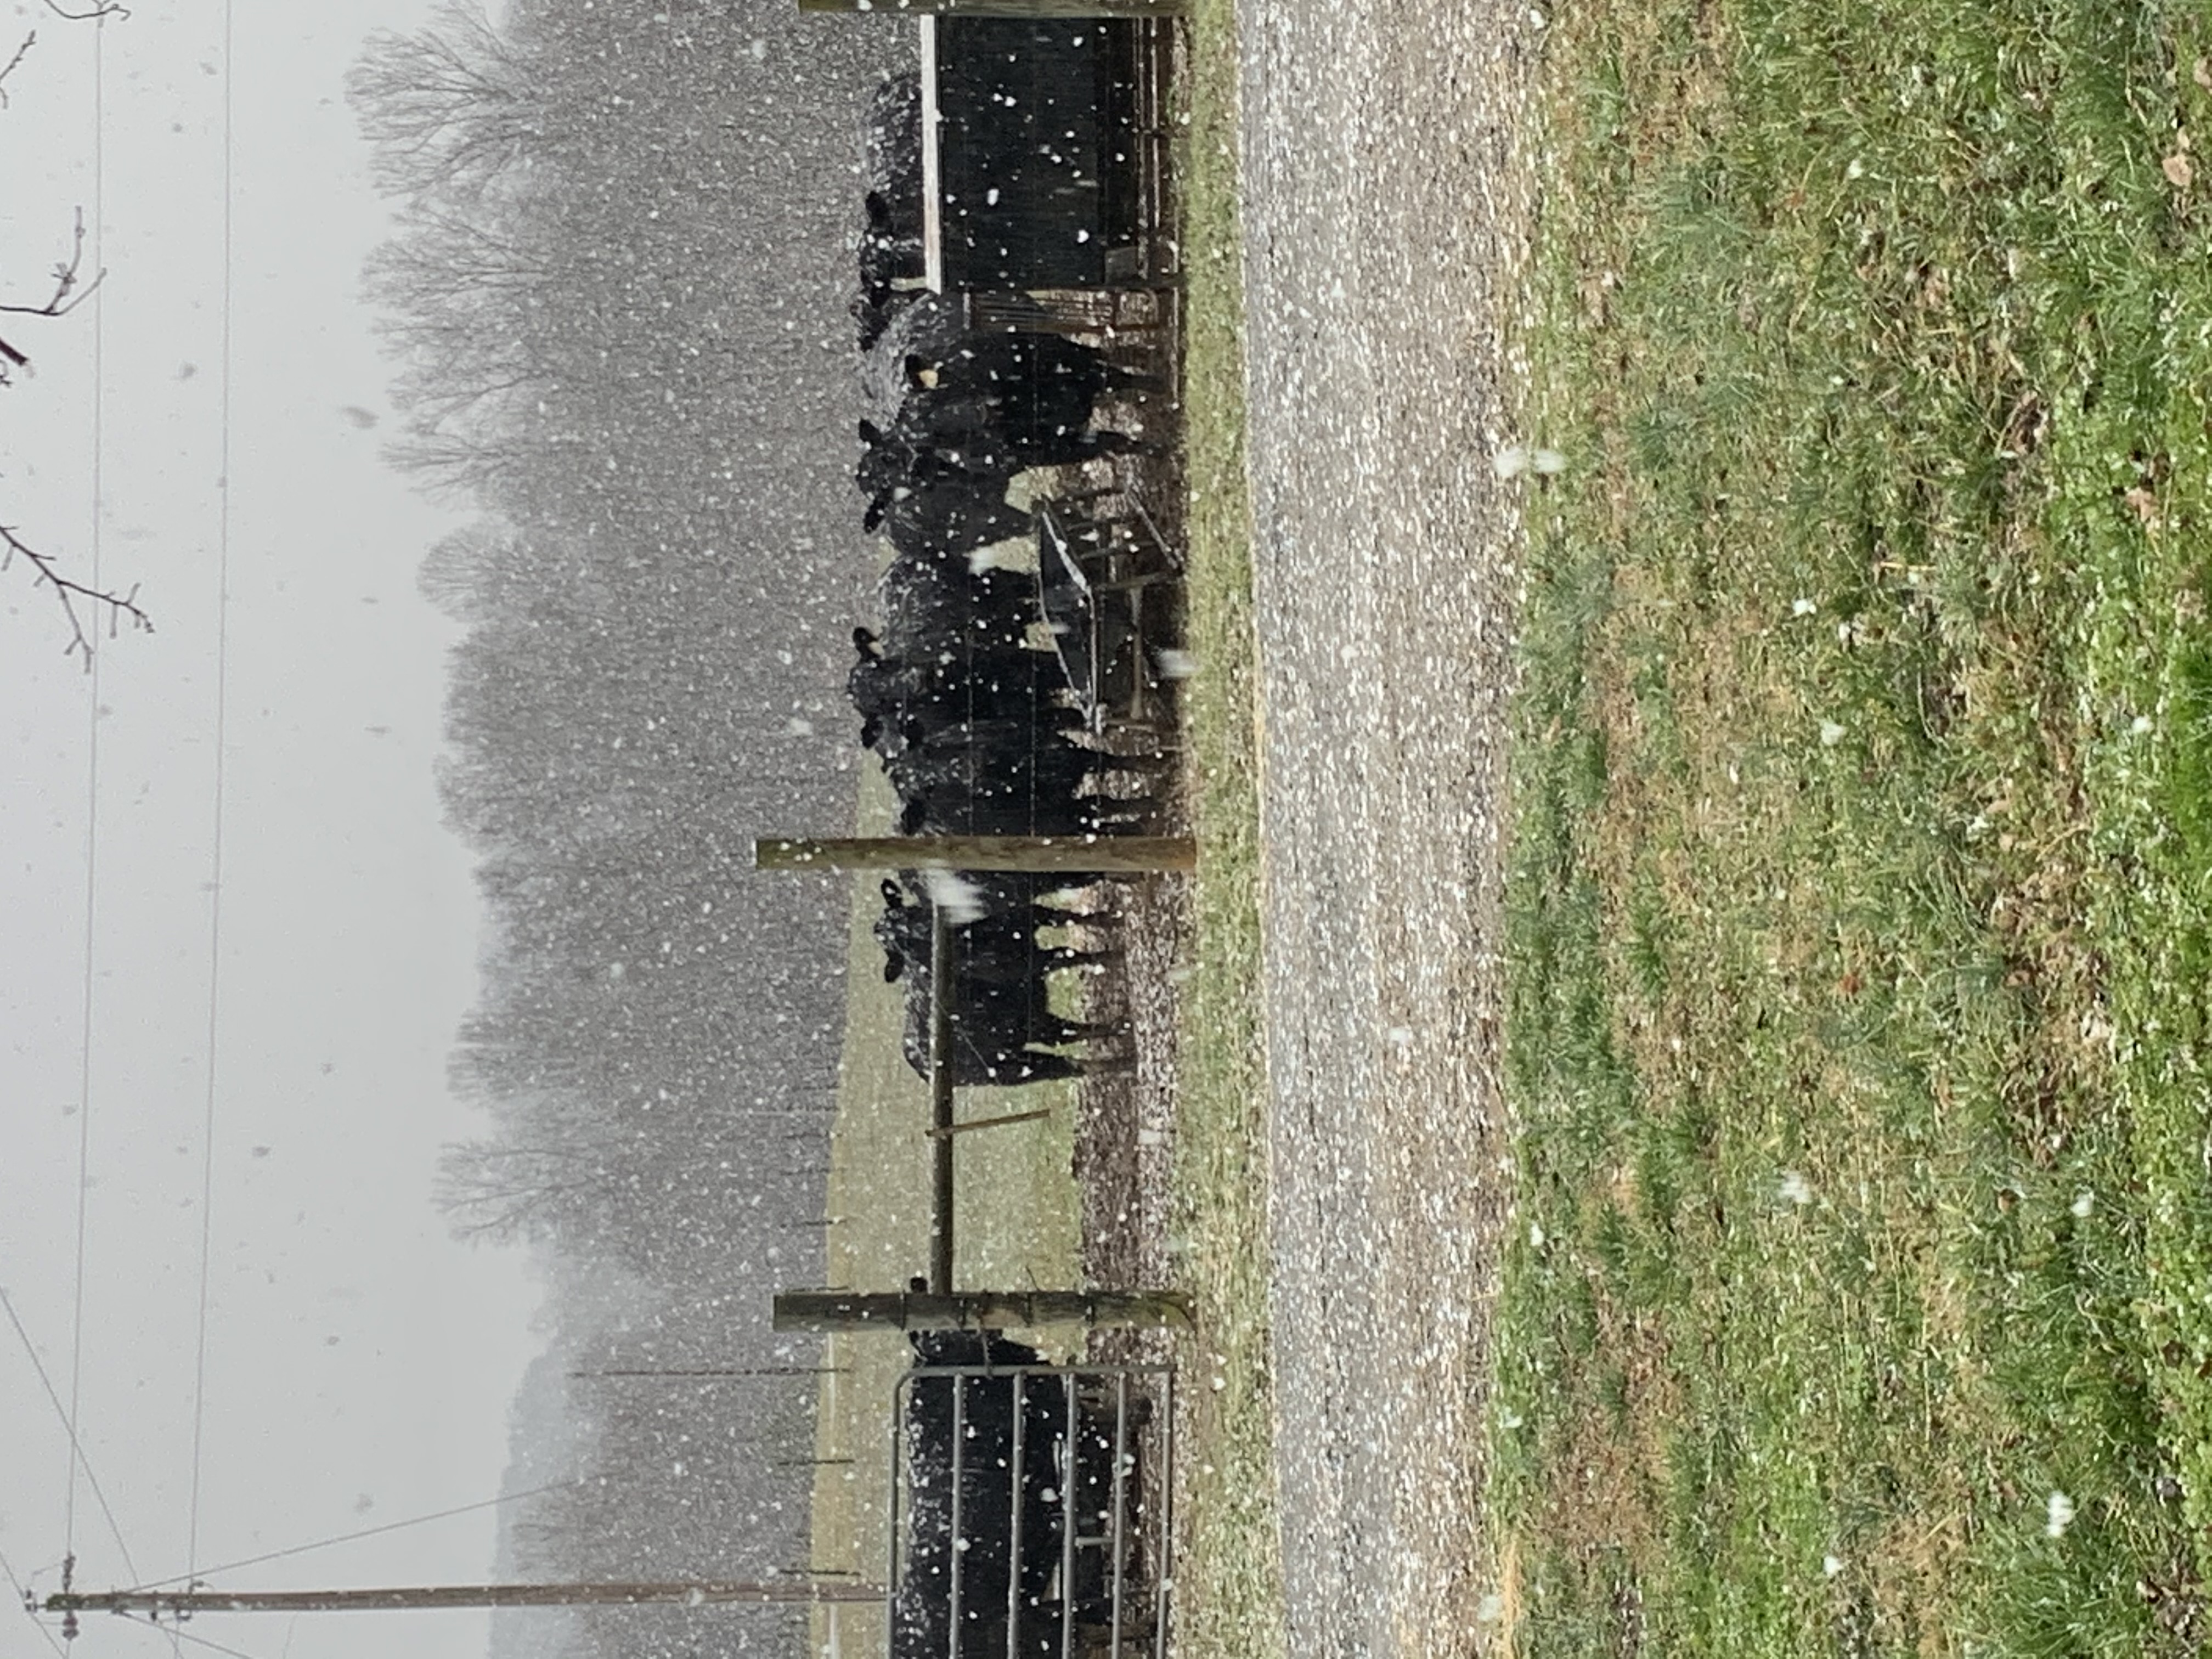 Cows in a field as snow falls around them.